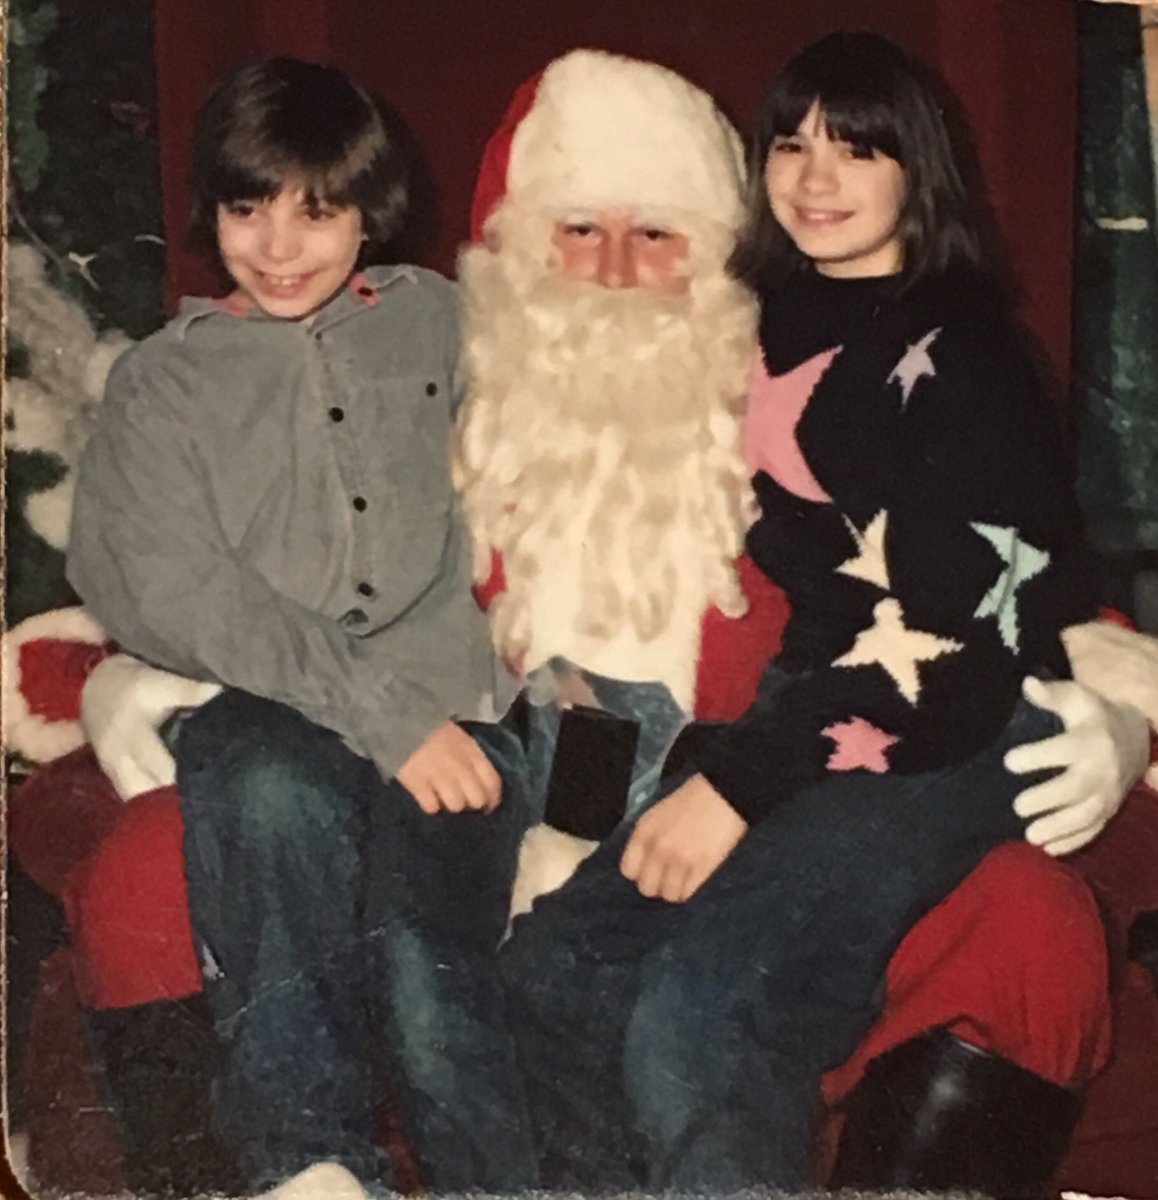 #ThrowbackThursday when I didn't notice how creepy this Santa was. #whereishishand?! https://t.co/5X2WjdEn5I